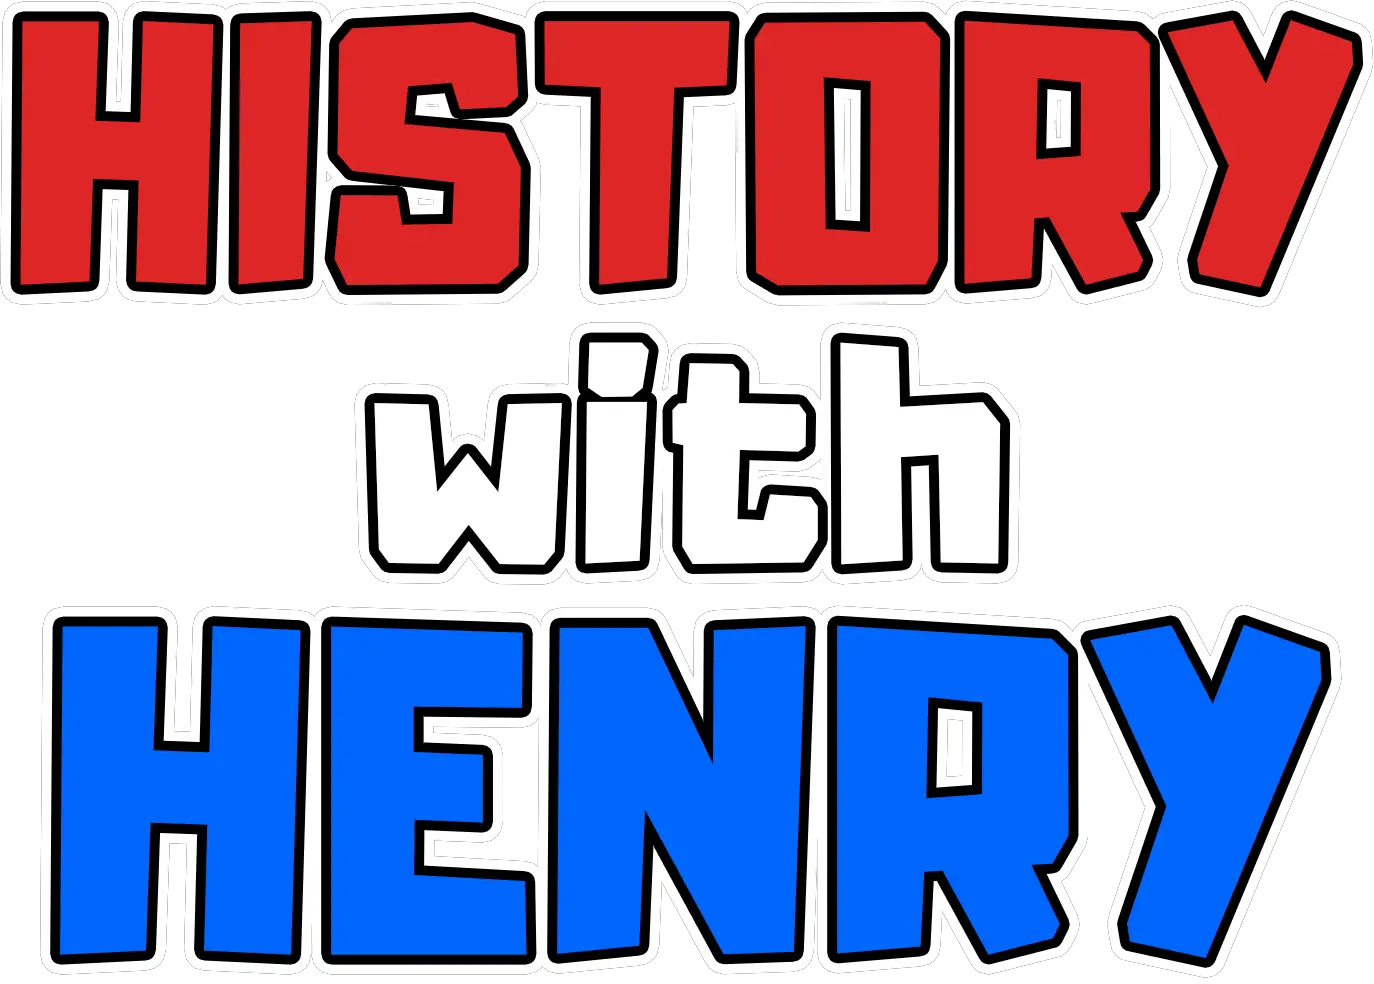 History with Henry